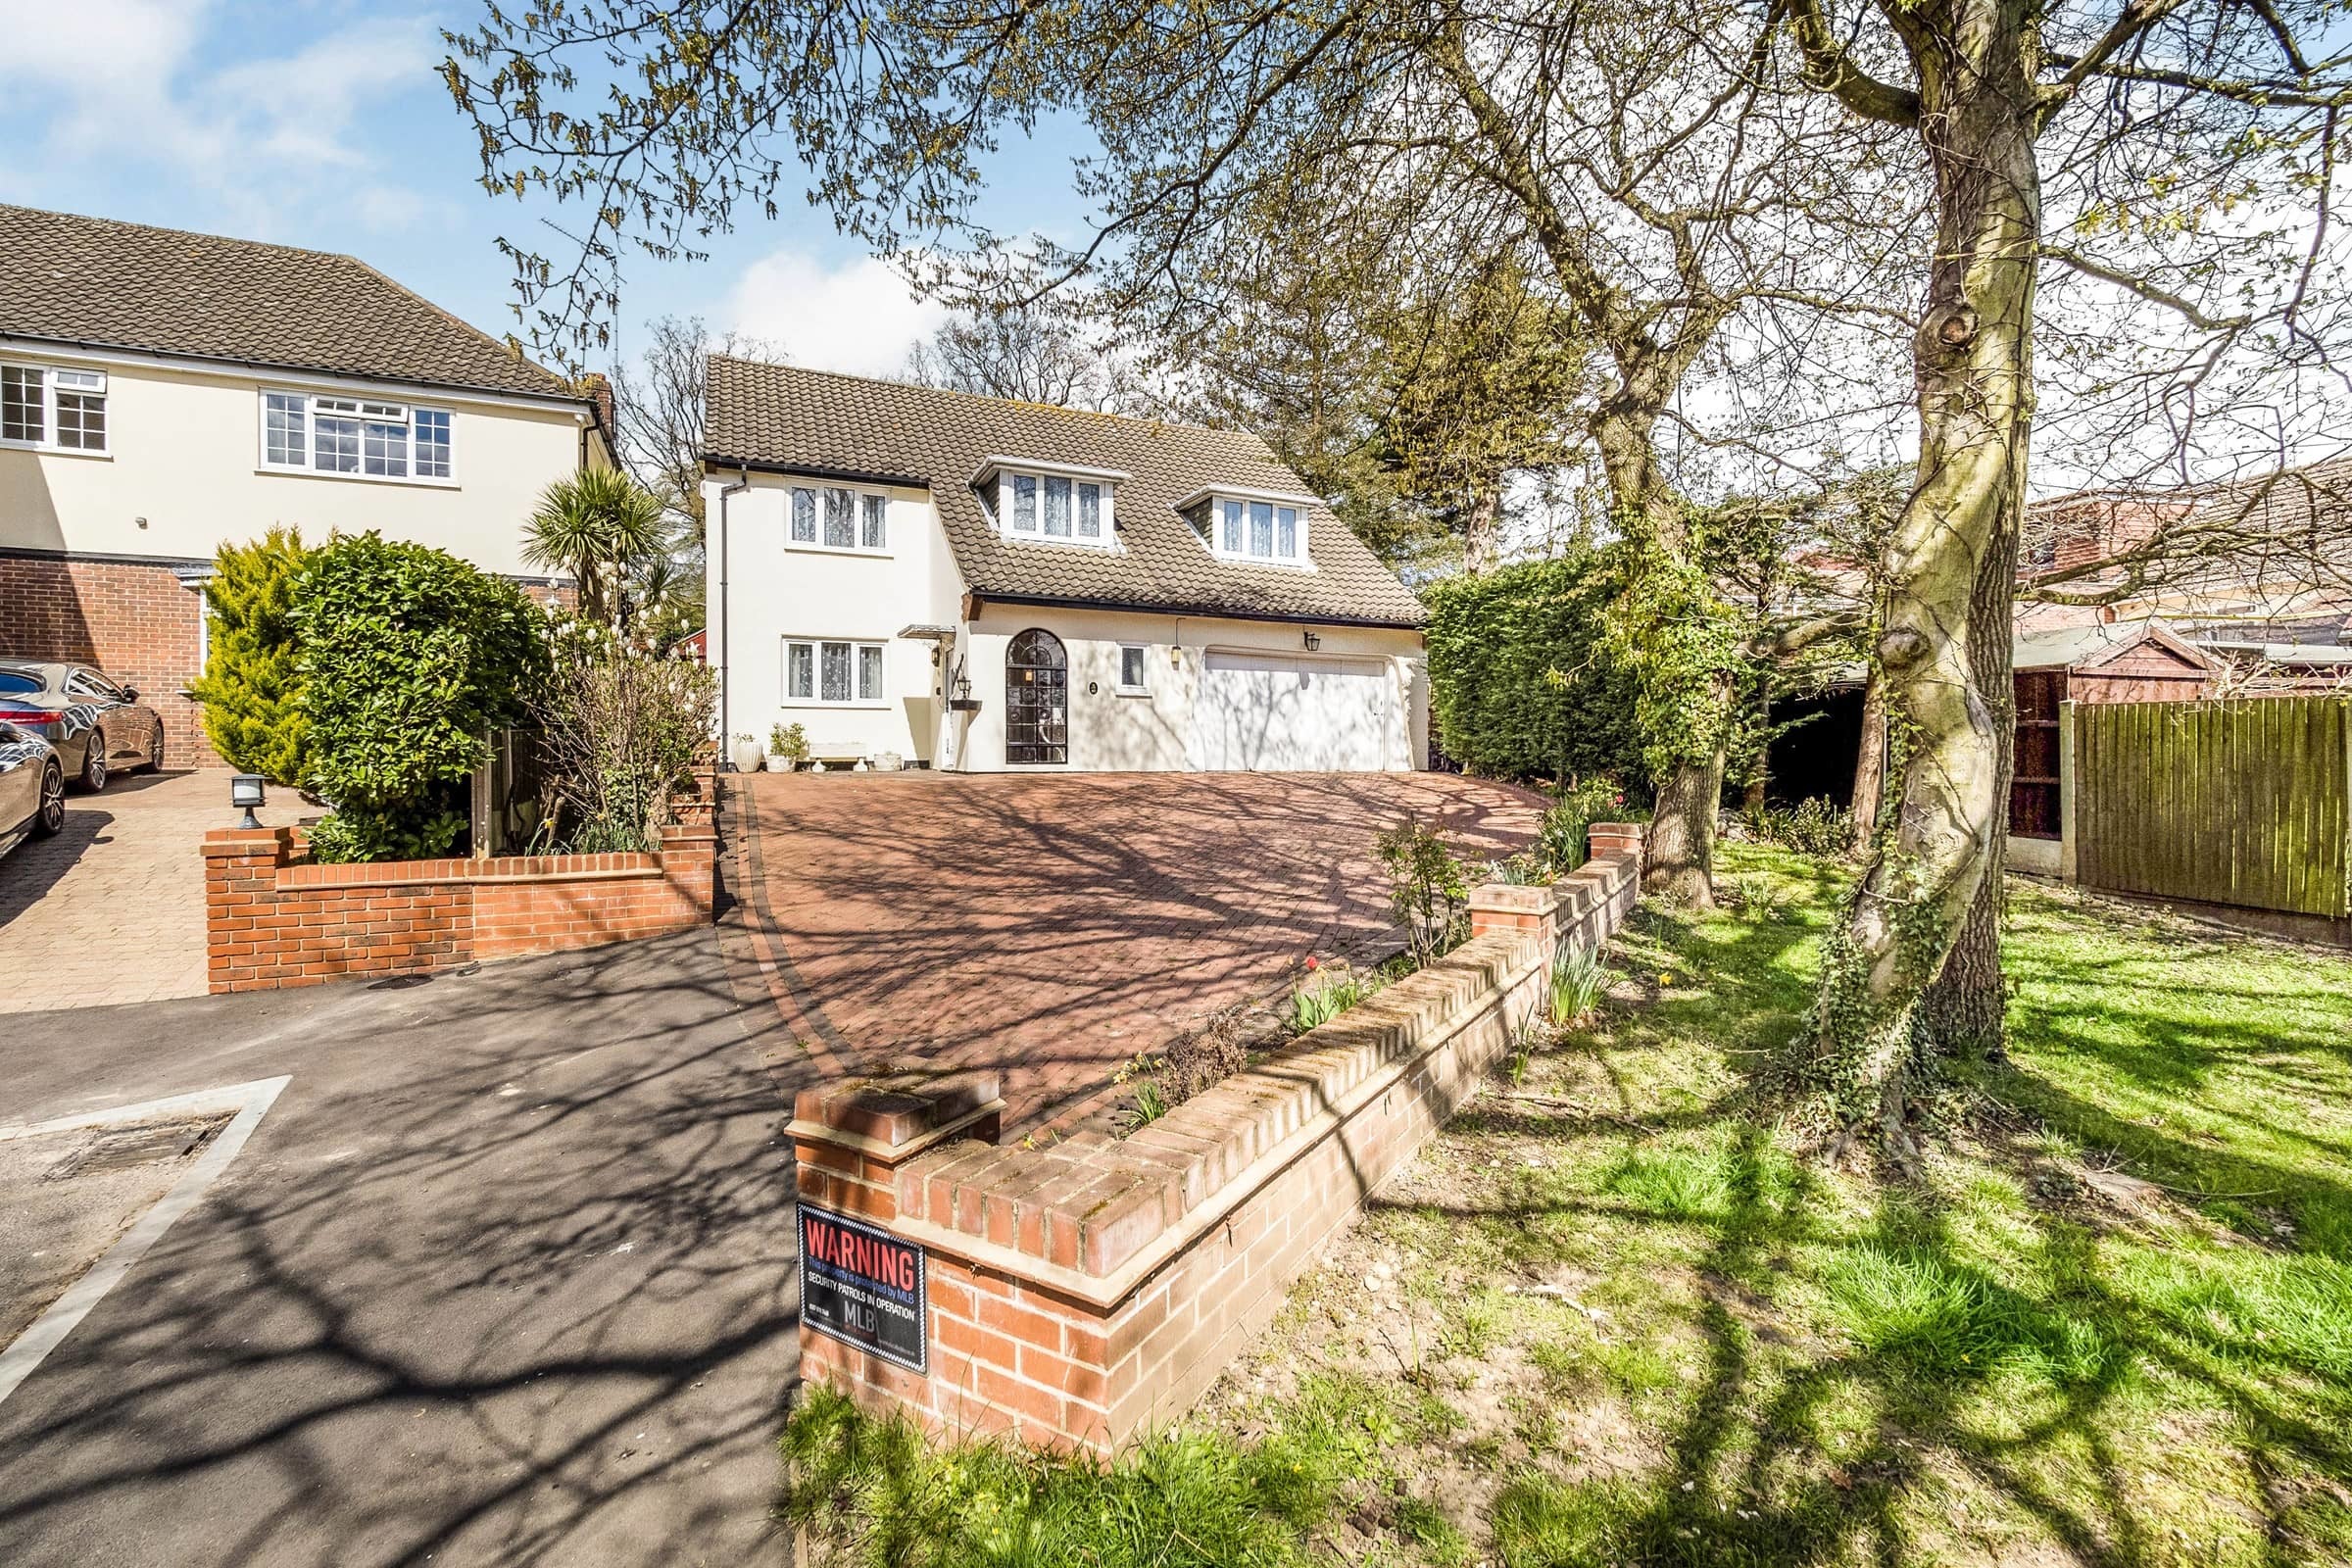 60 Stradbroke Drive will be up for auction with a guide price of £1.65m. Photos: SDL